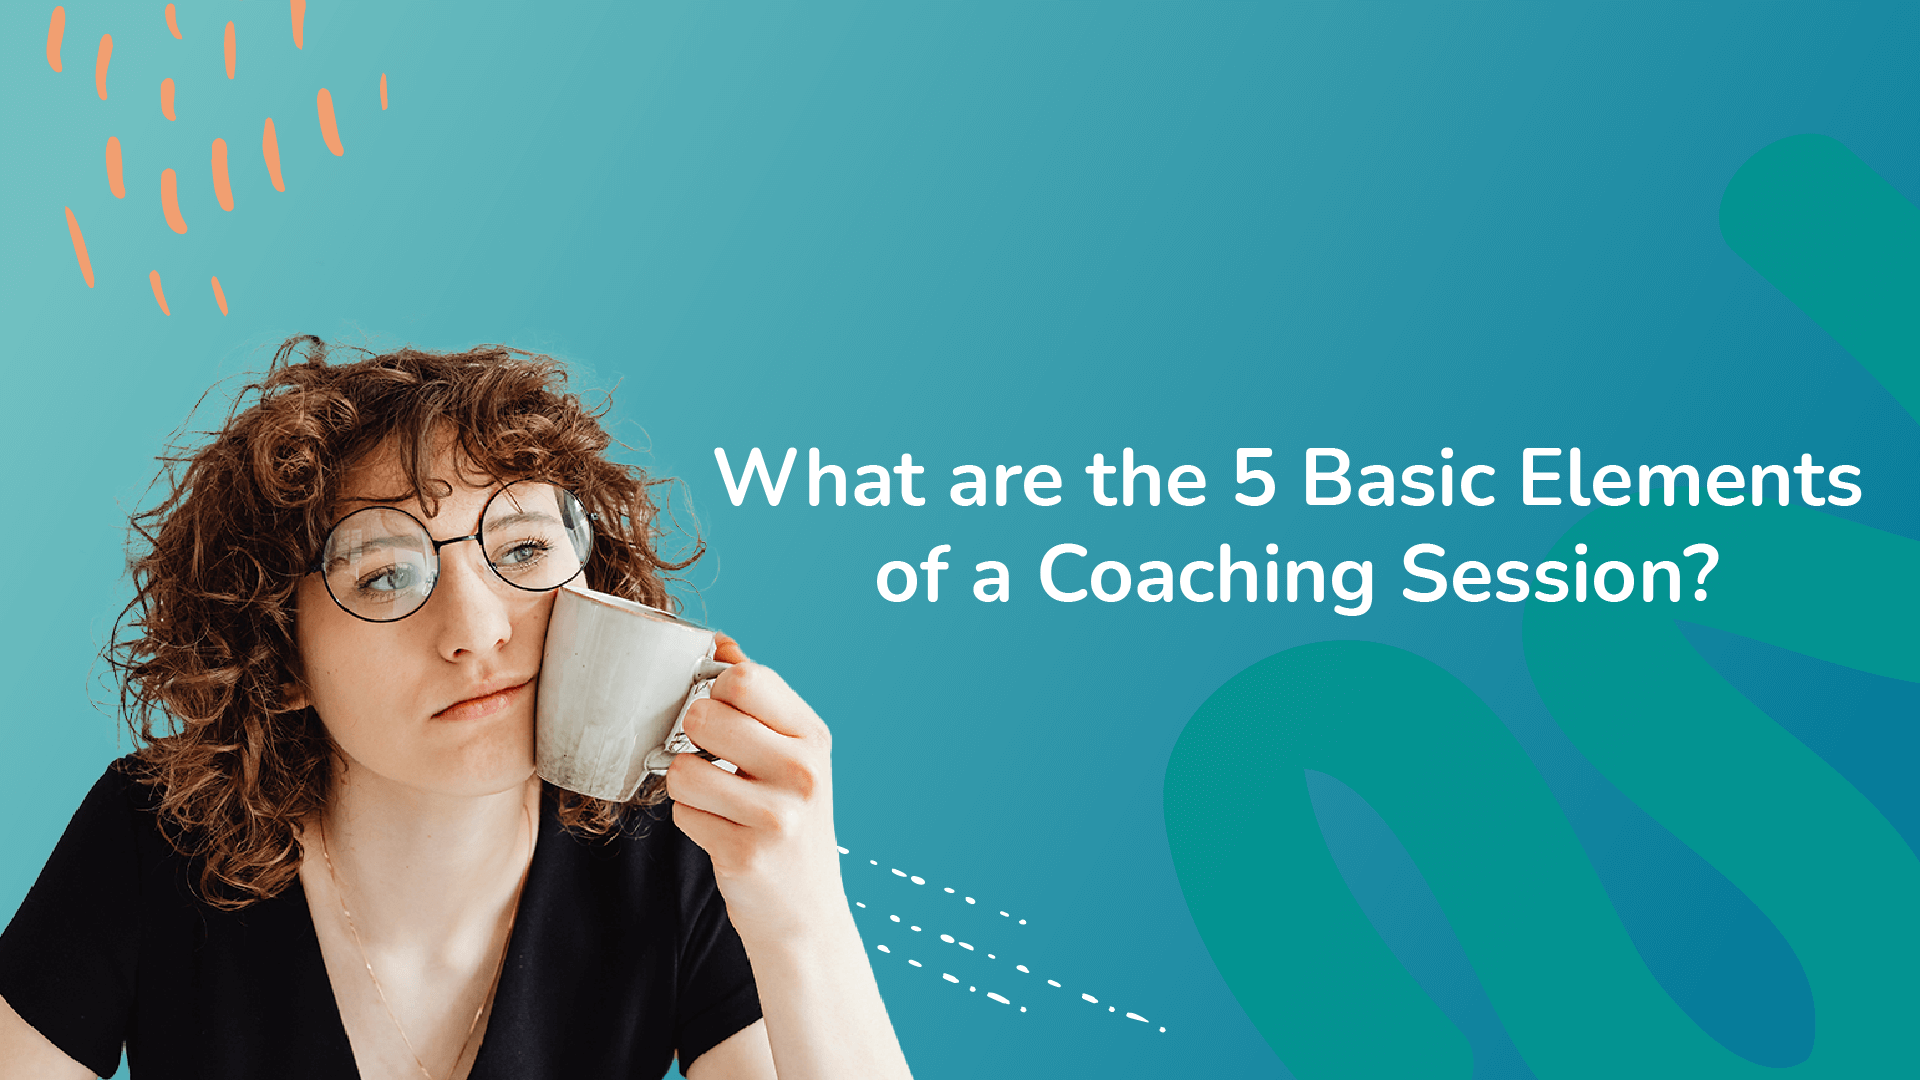 What are the 5 Basic Elements of a Coaching Session?